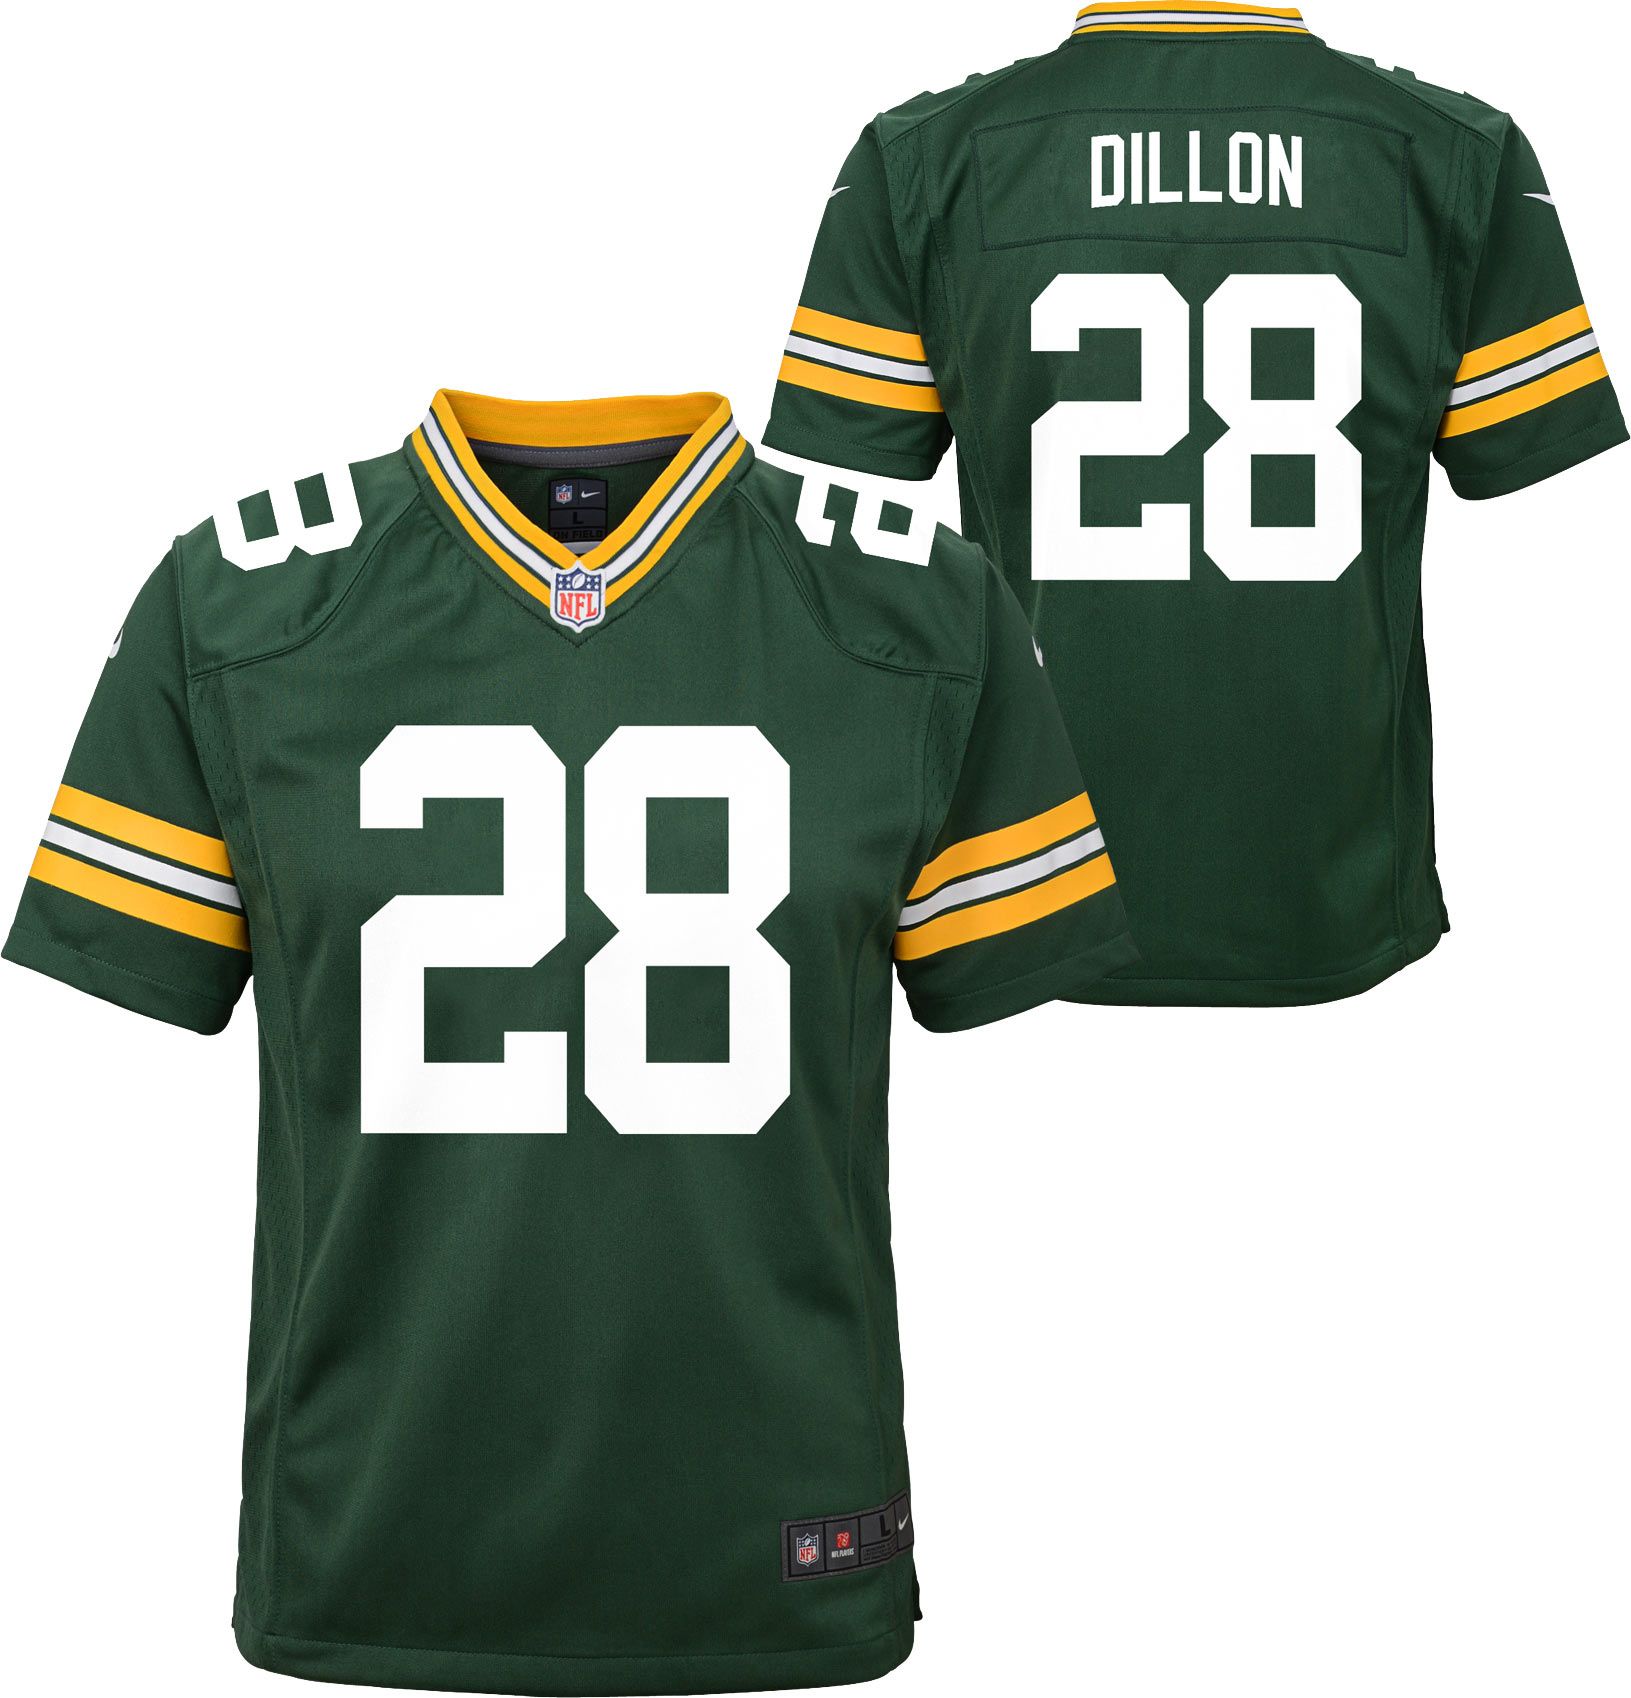 Green Bay Packers official jersey